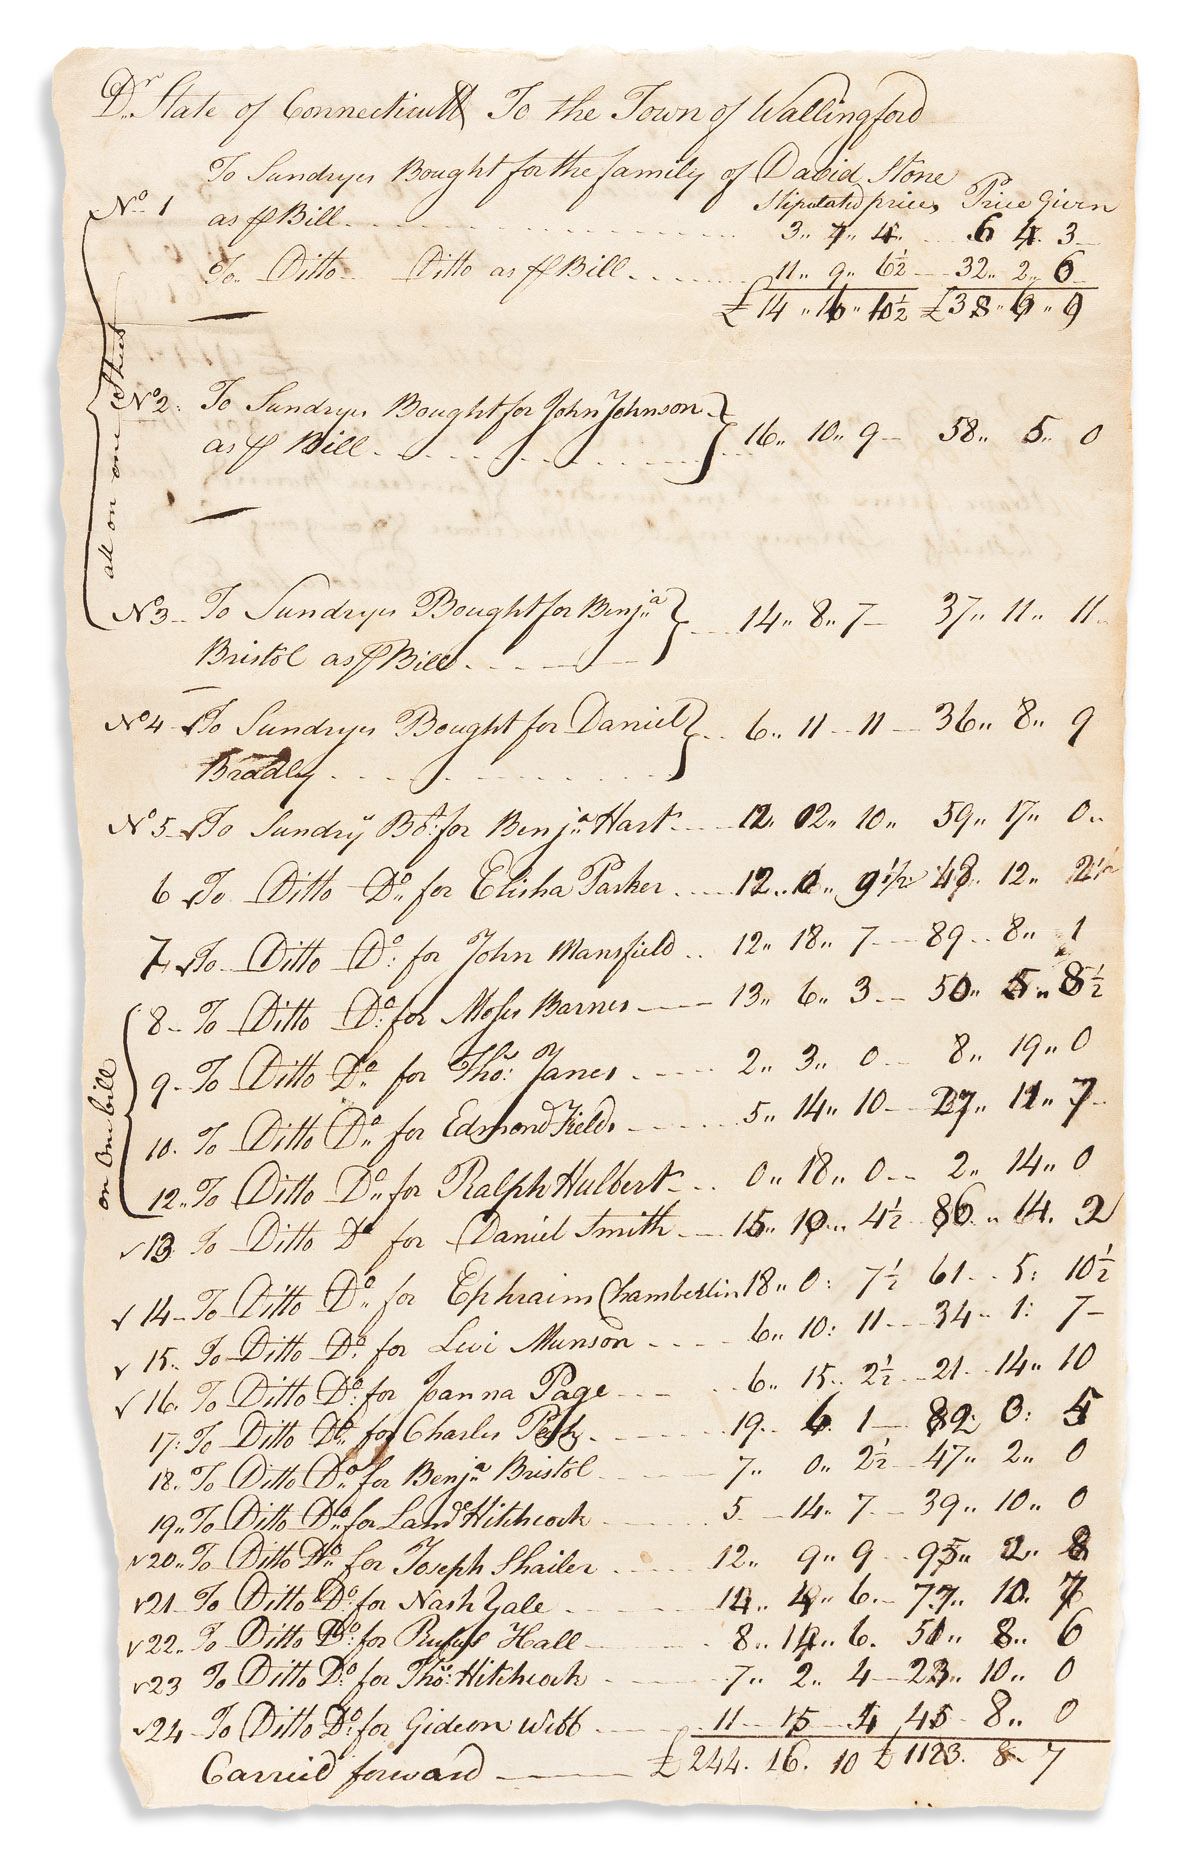 (AMERICAN REVOLUTION--1778.) Invoice for the support of 25 soldiers families in Wallingford, CT.